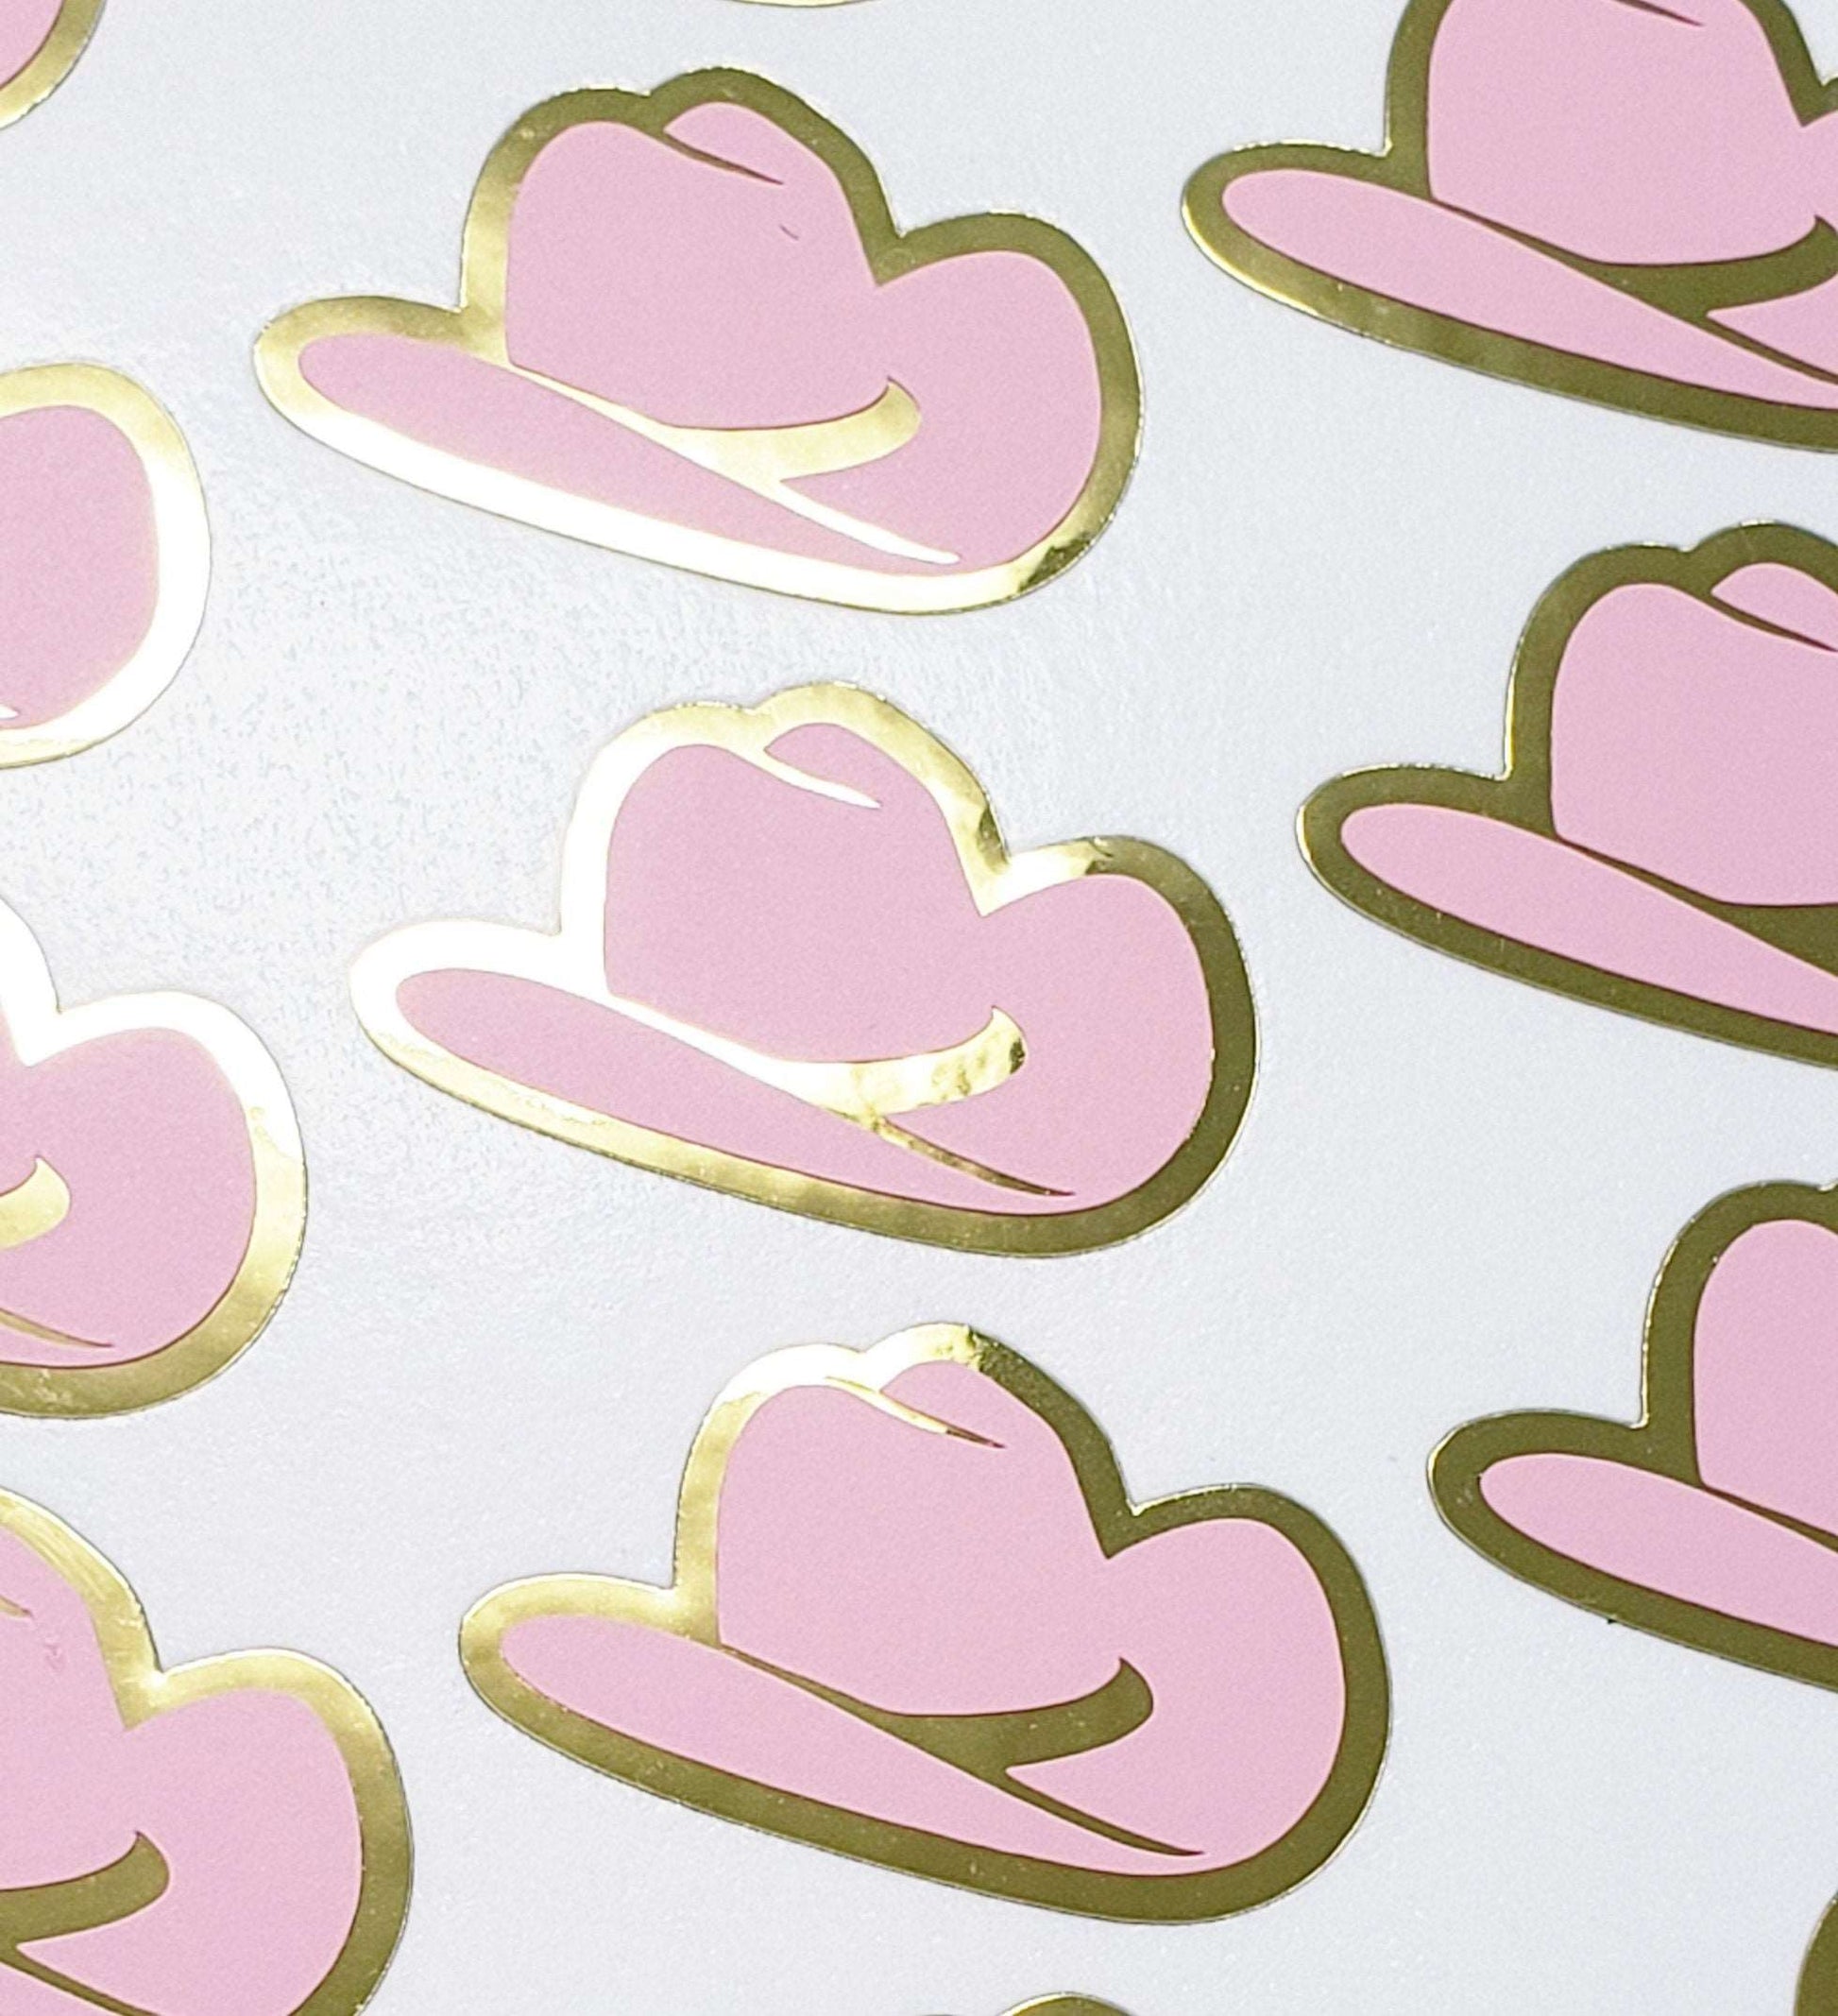 Pink Cowboy Hats Sticker Sheet, set of 32 pink and gold hat stickers for bachelorette parties, journals, country music concerts and shows.